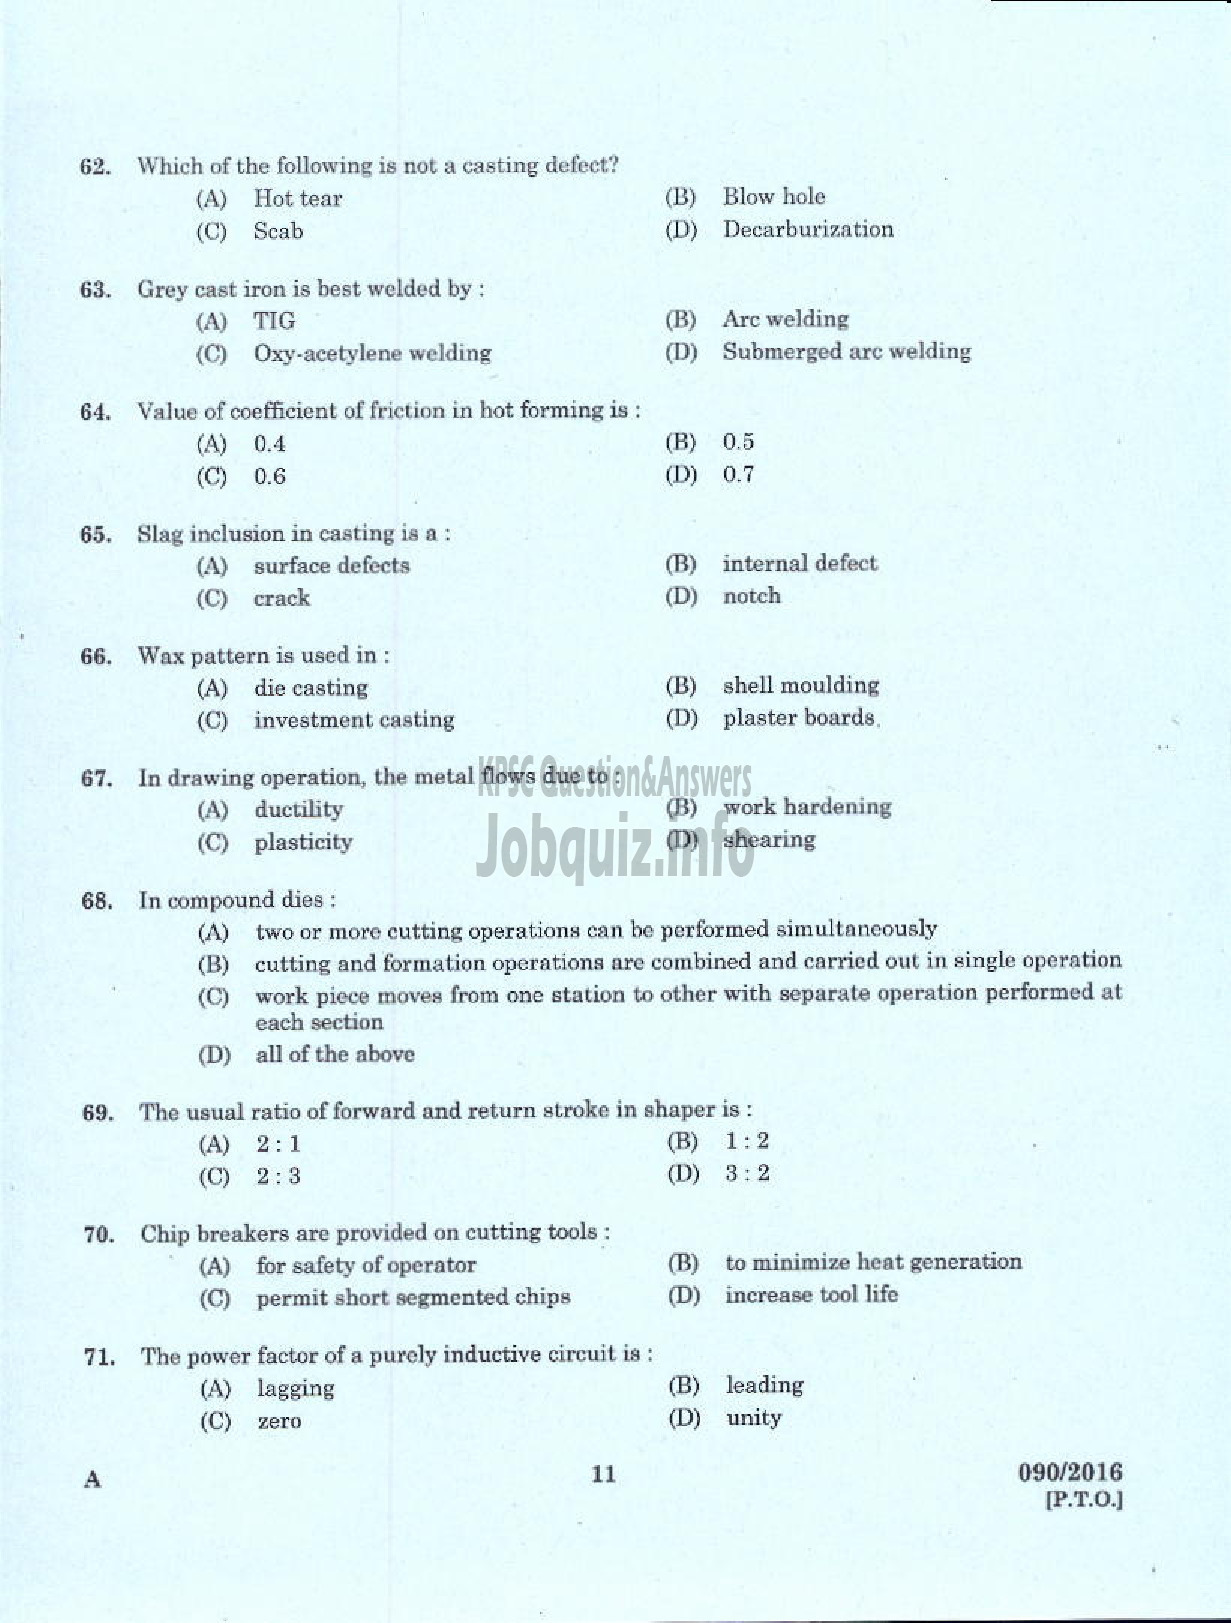 Kerala PSC Question Paper - VOCATIONAL INSTRUCTOR IN REFRIGERATION AND AIR CONDITIONING VHSE-9